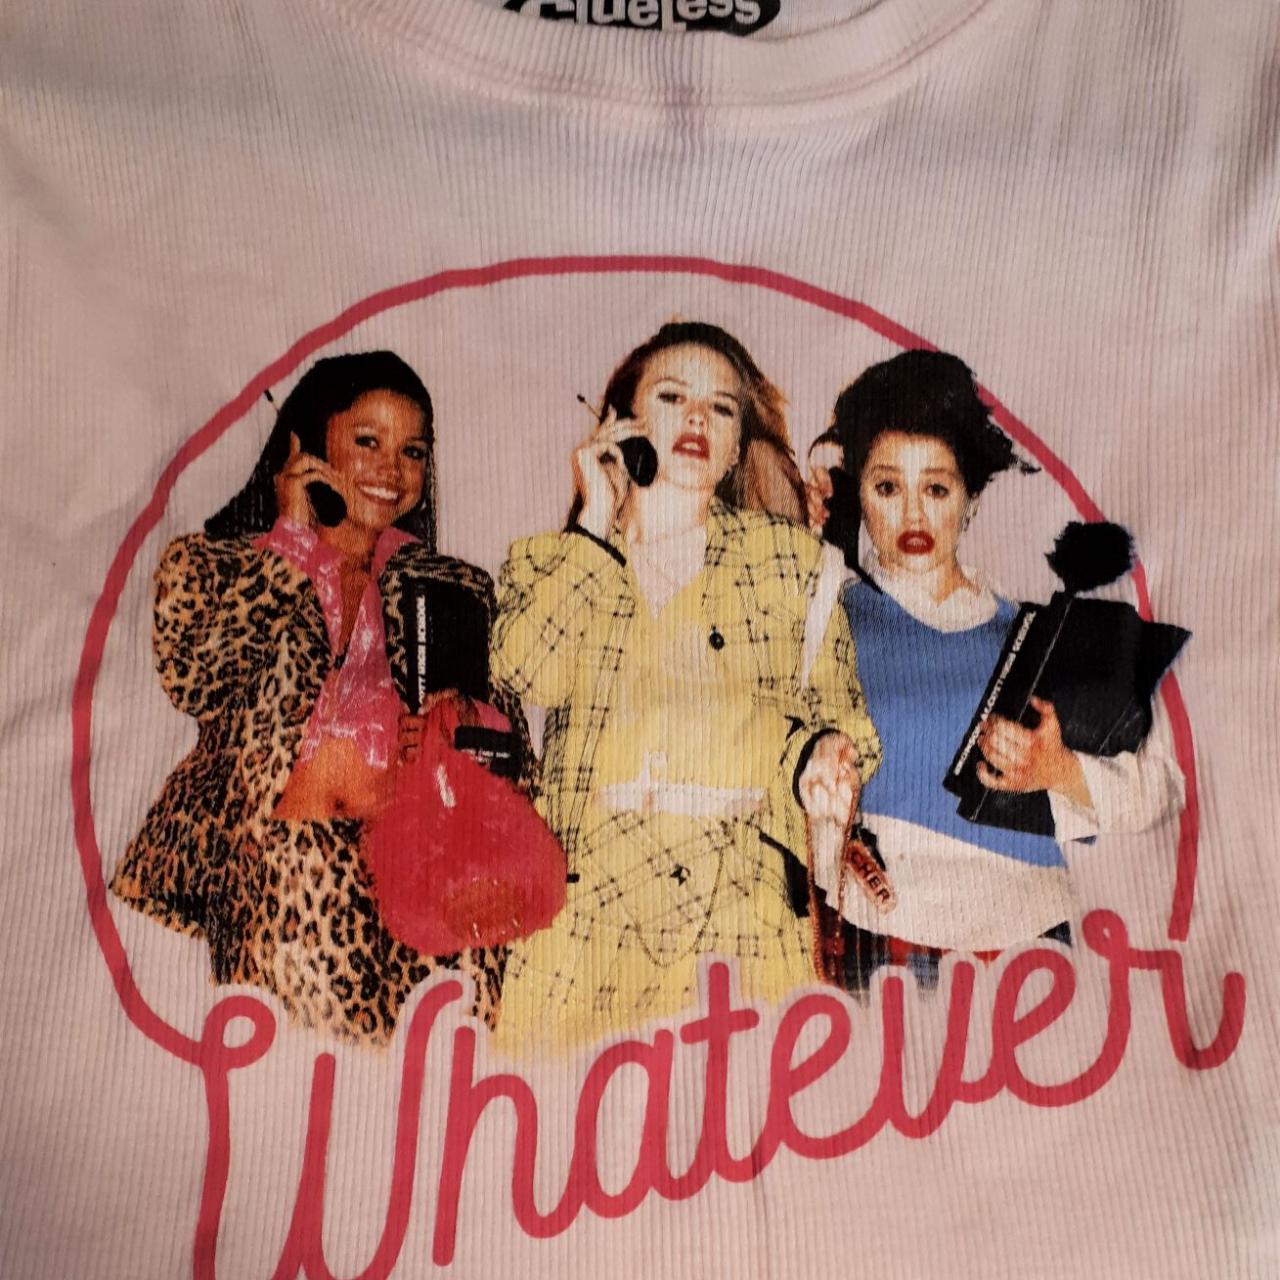 Clueless Whatever Girls Ribbed Knit T Shirt Size Depop 